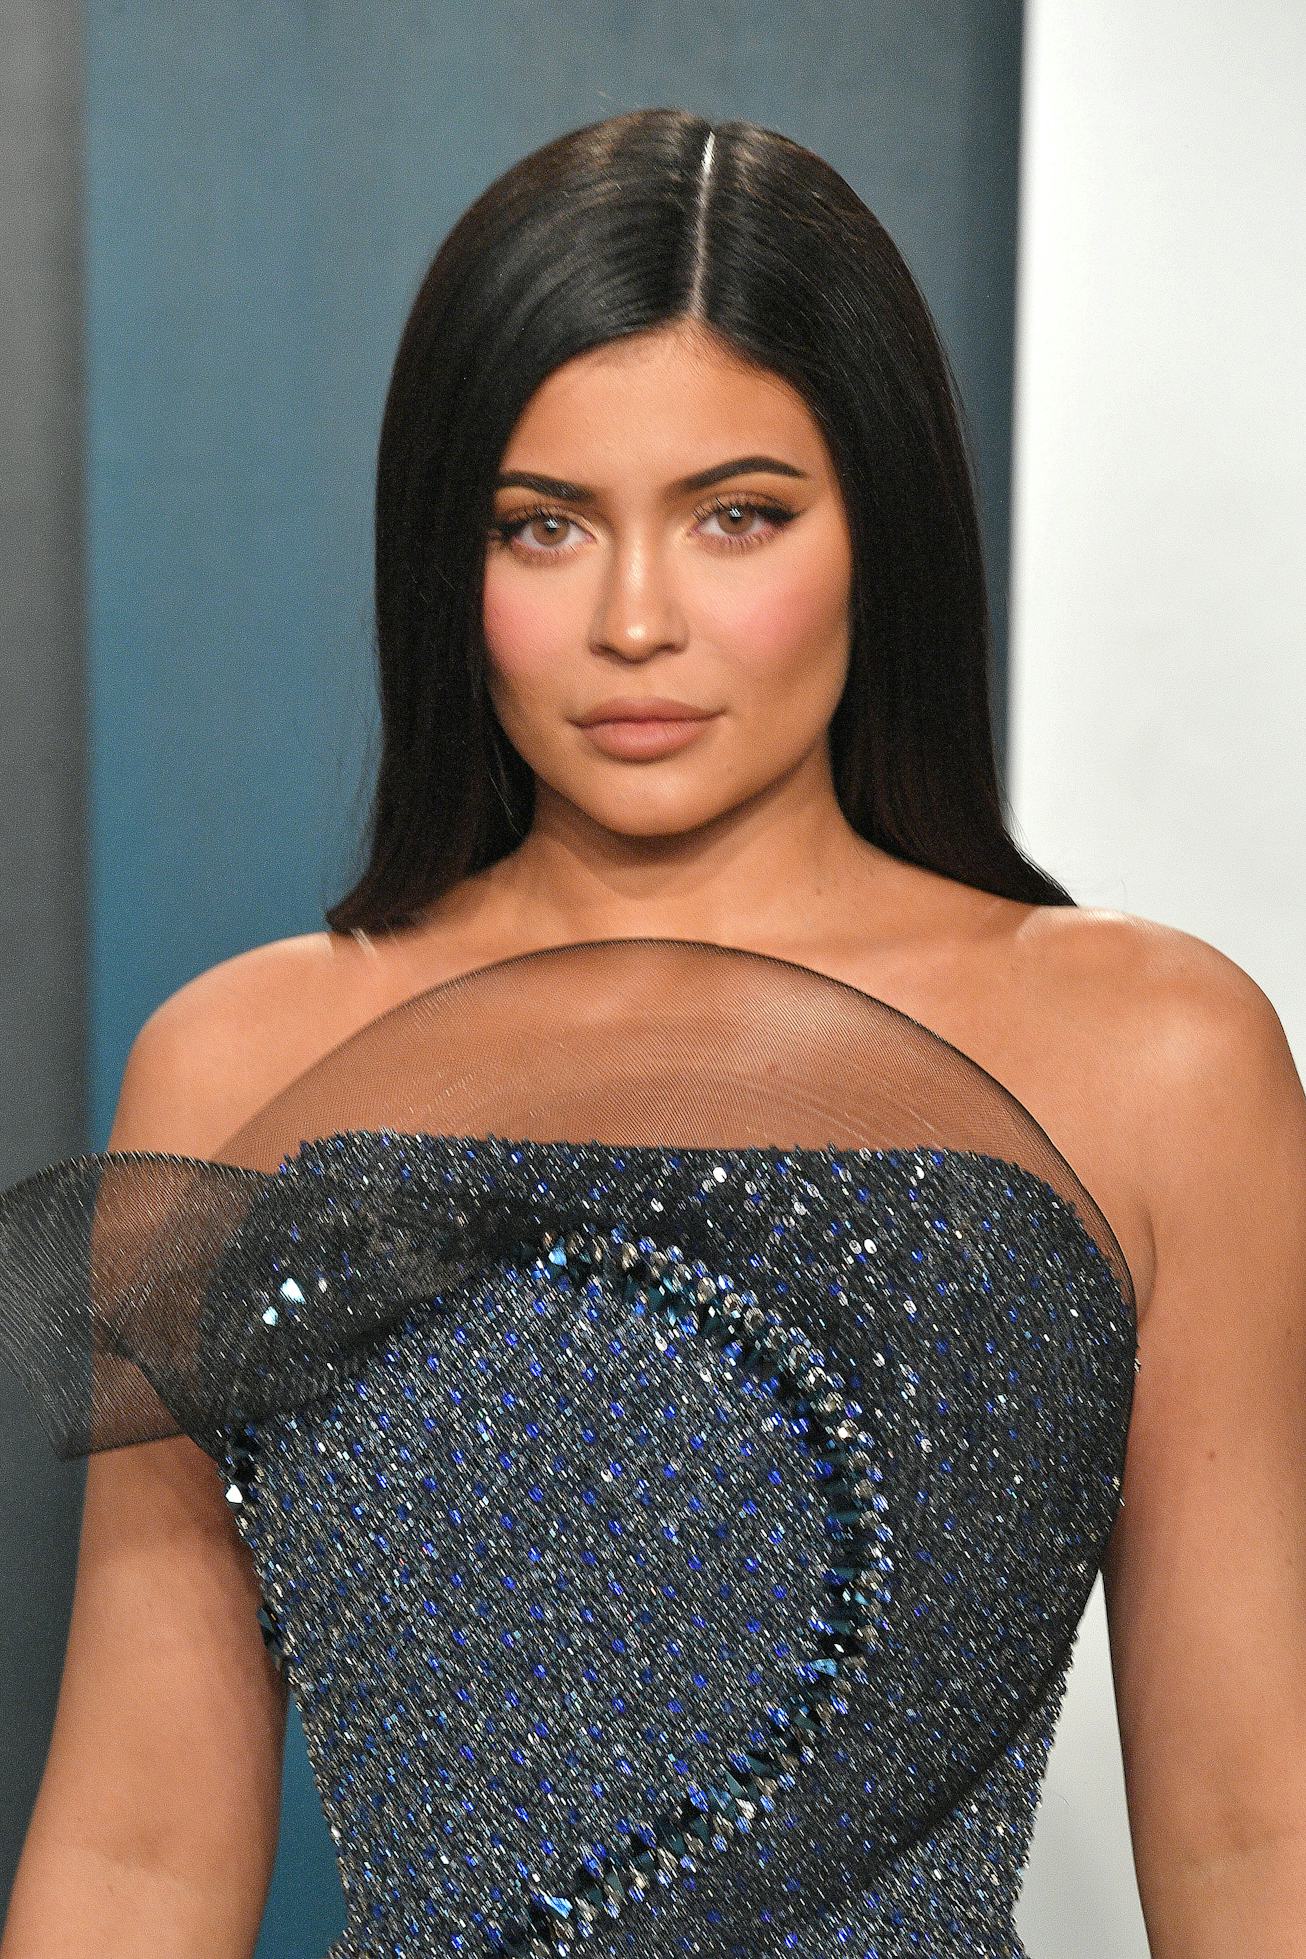 Kylie Jenner on the red carpet with a sleeked middle part.